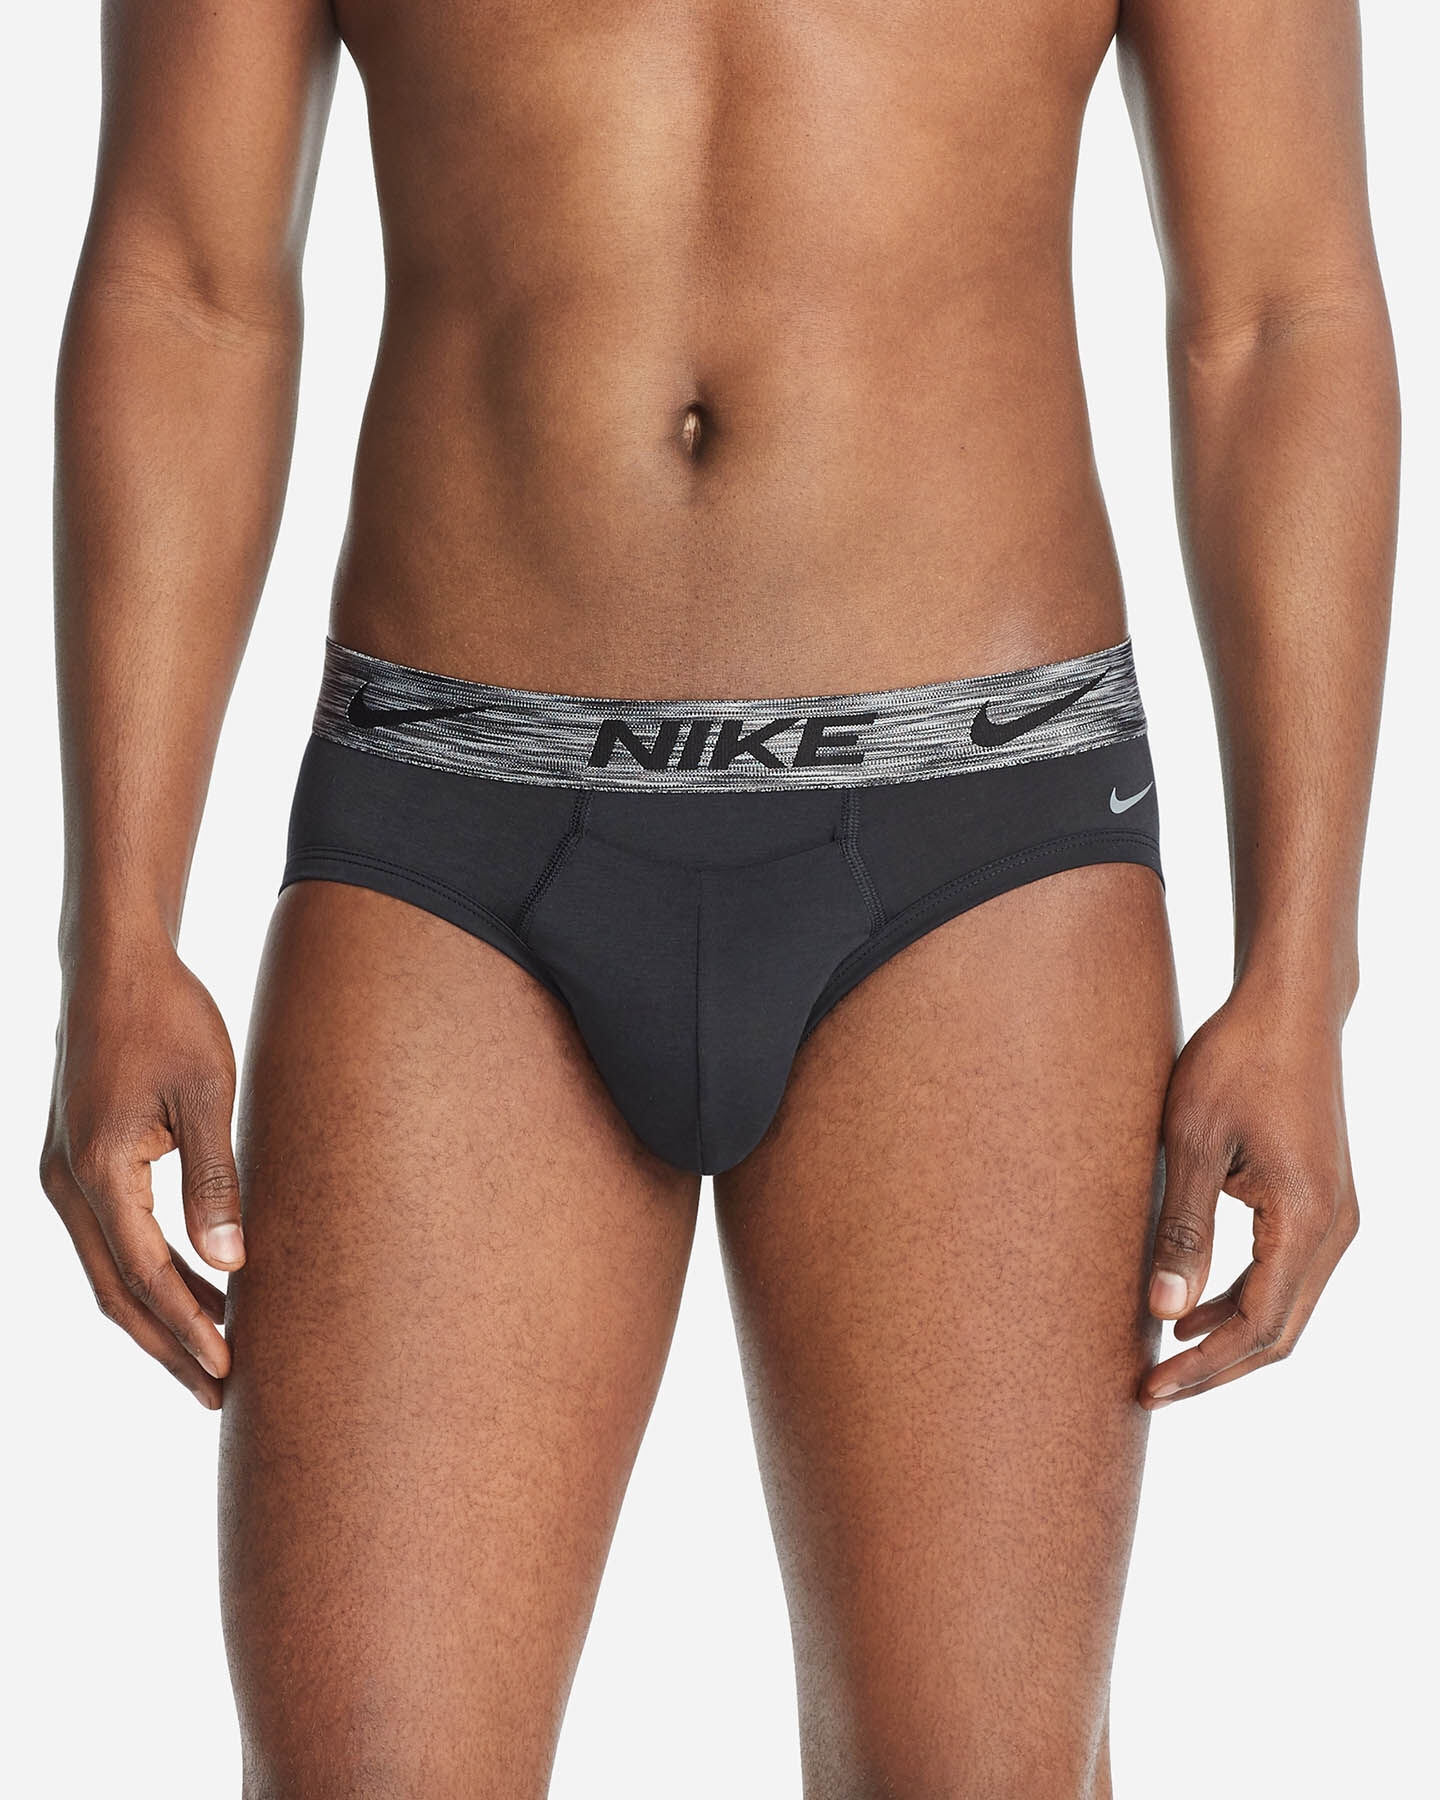  Intimo NIKE 2PACK SLIP RELUX M S4099901|UB1|L scatto 1